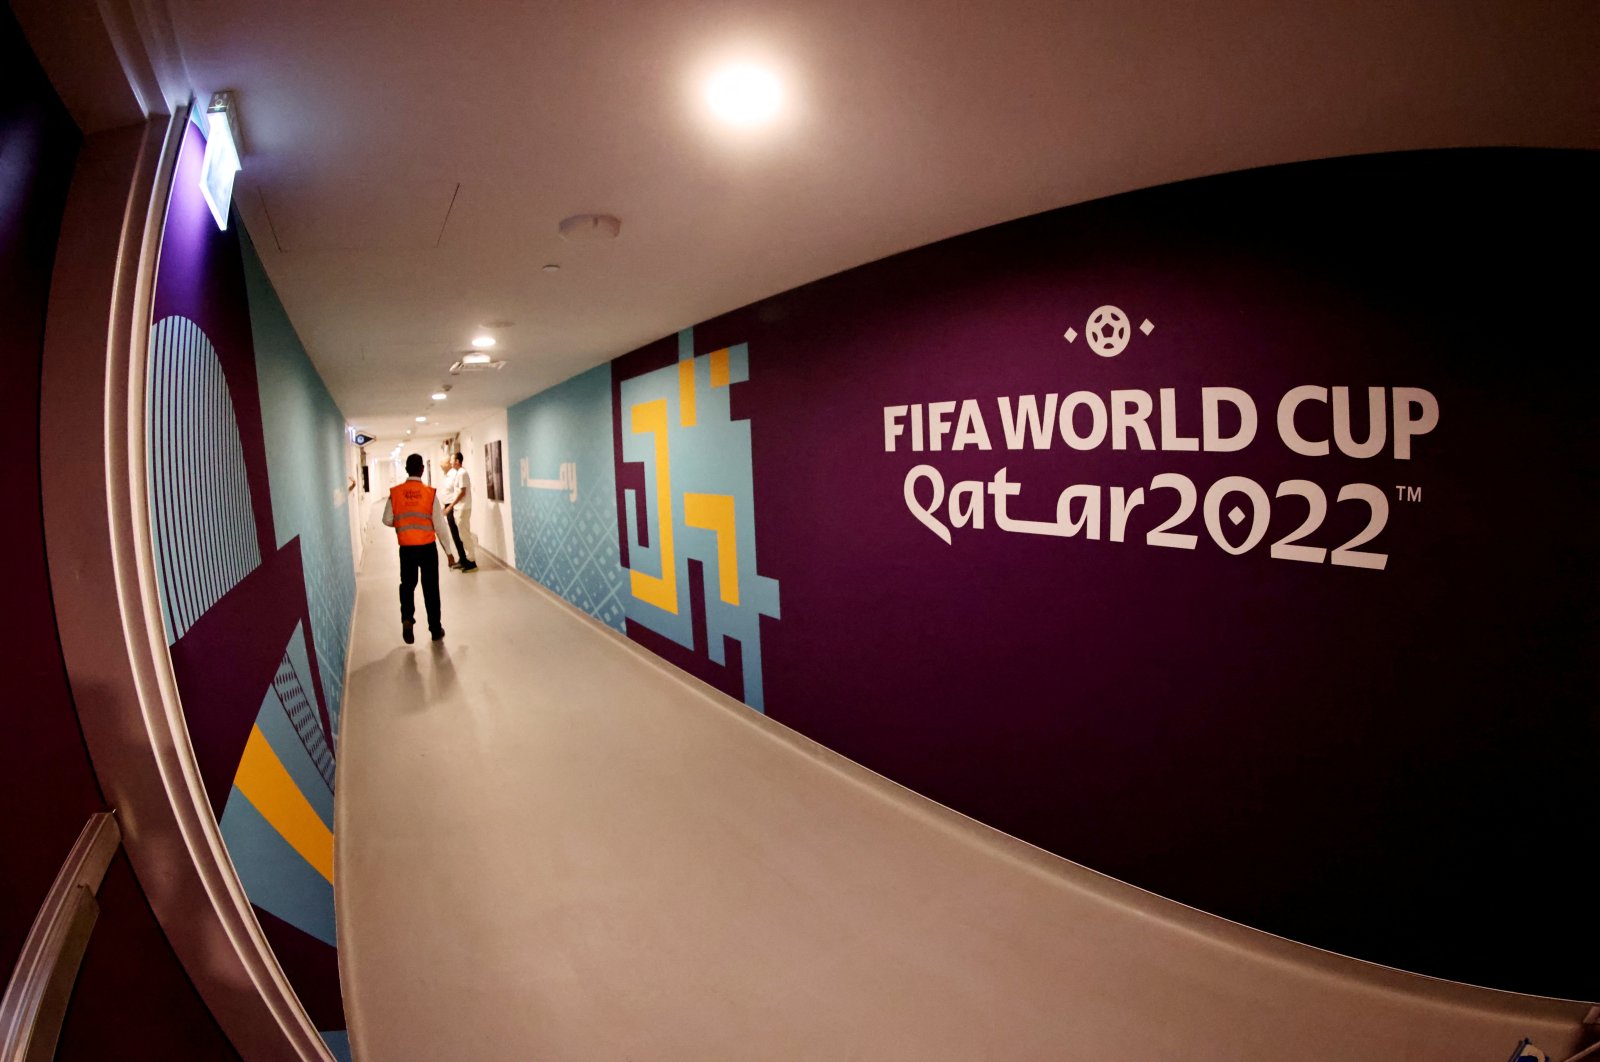 A general view inside a stadium ahead of the Qatar 2022 World Cup in Doha, Qatar, Sept. 22, 2022. (Reuters Photo)